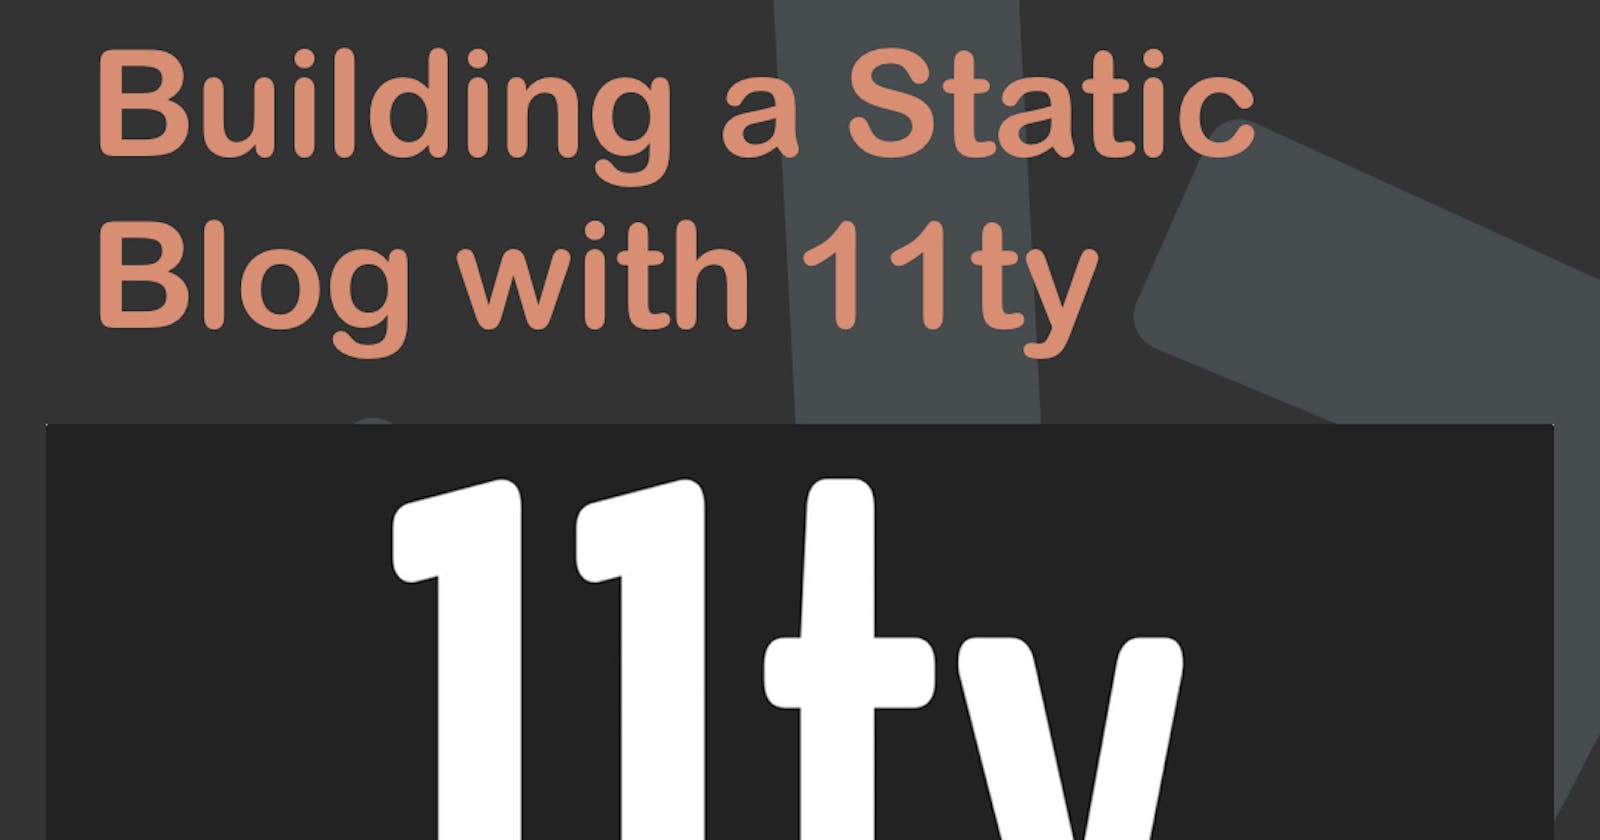 Building a Static Blog with 11ty